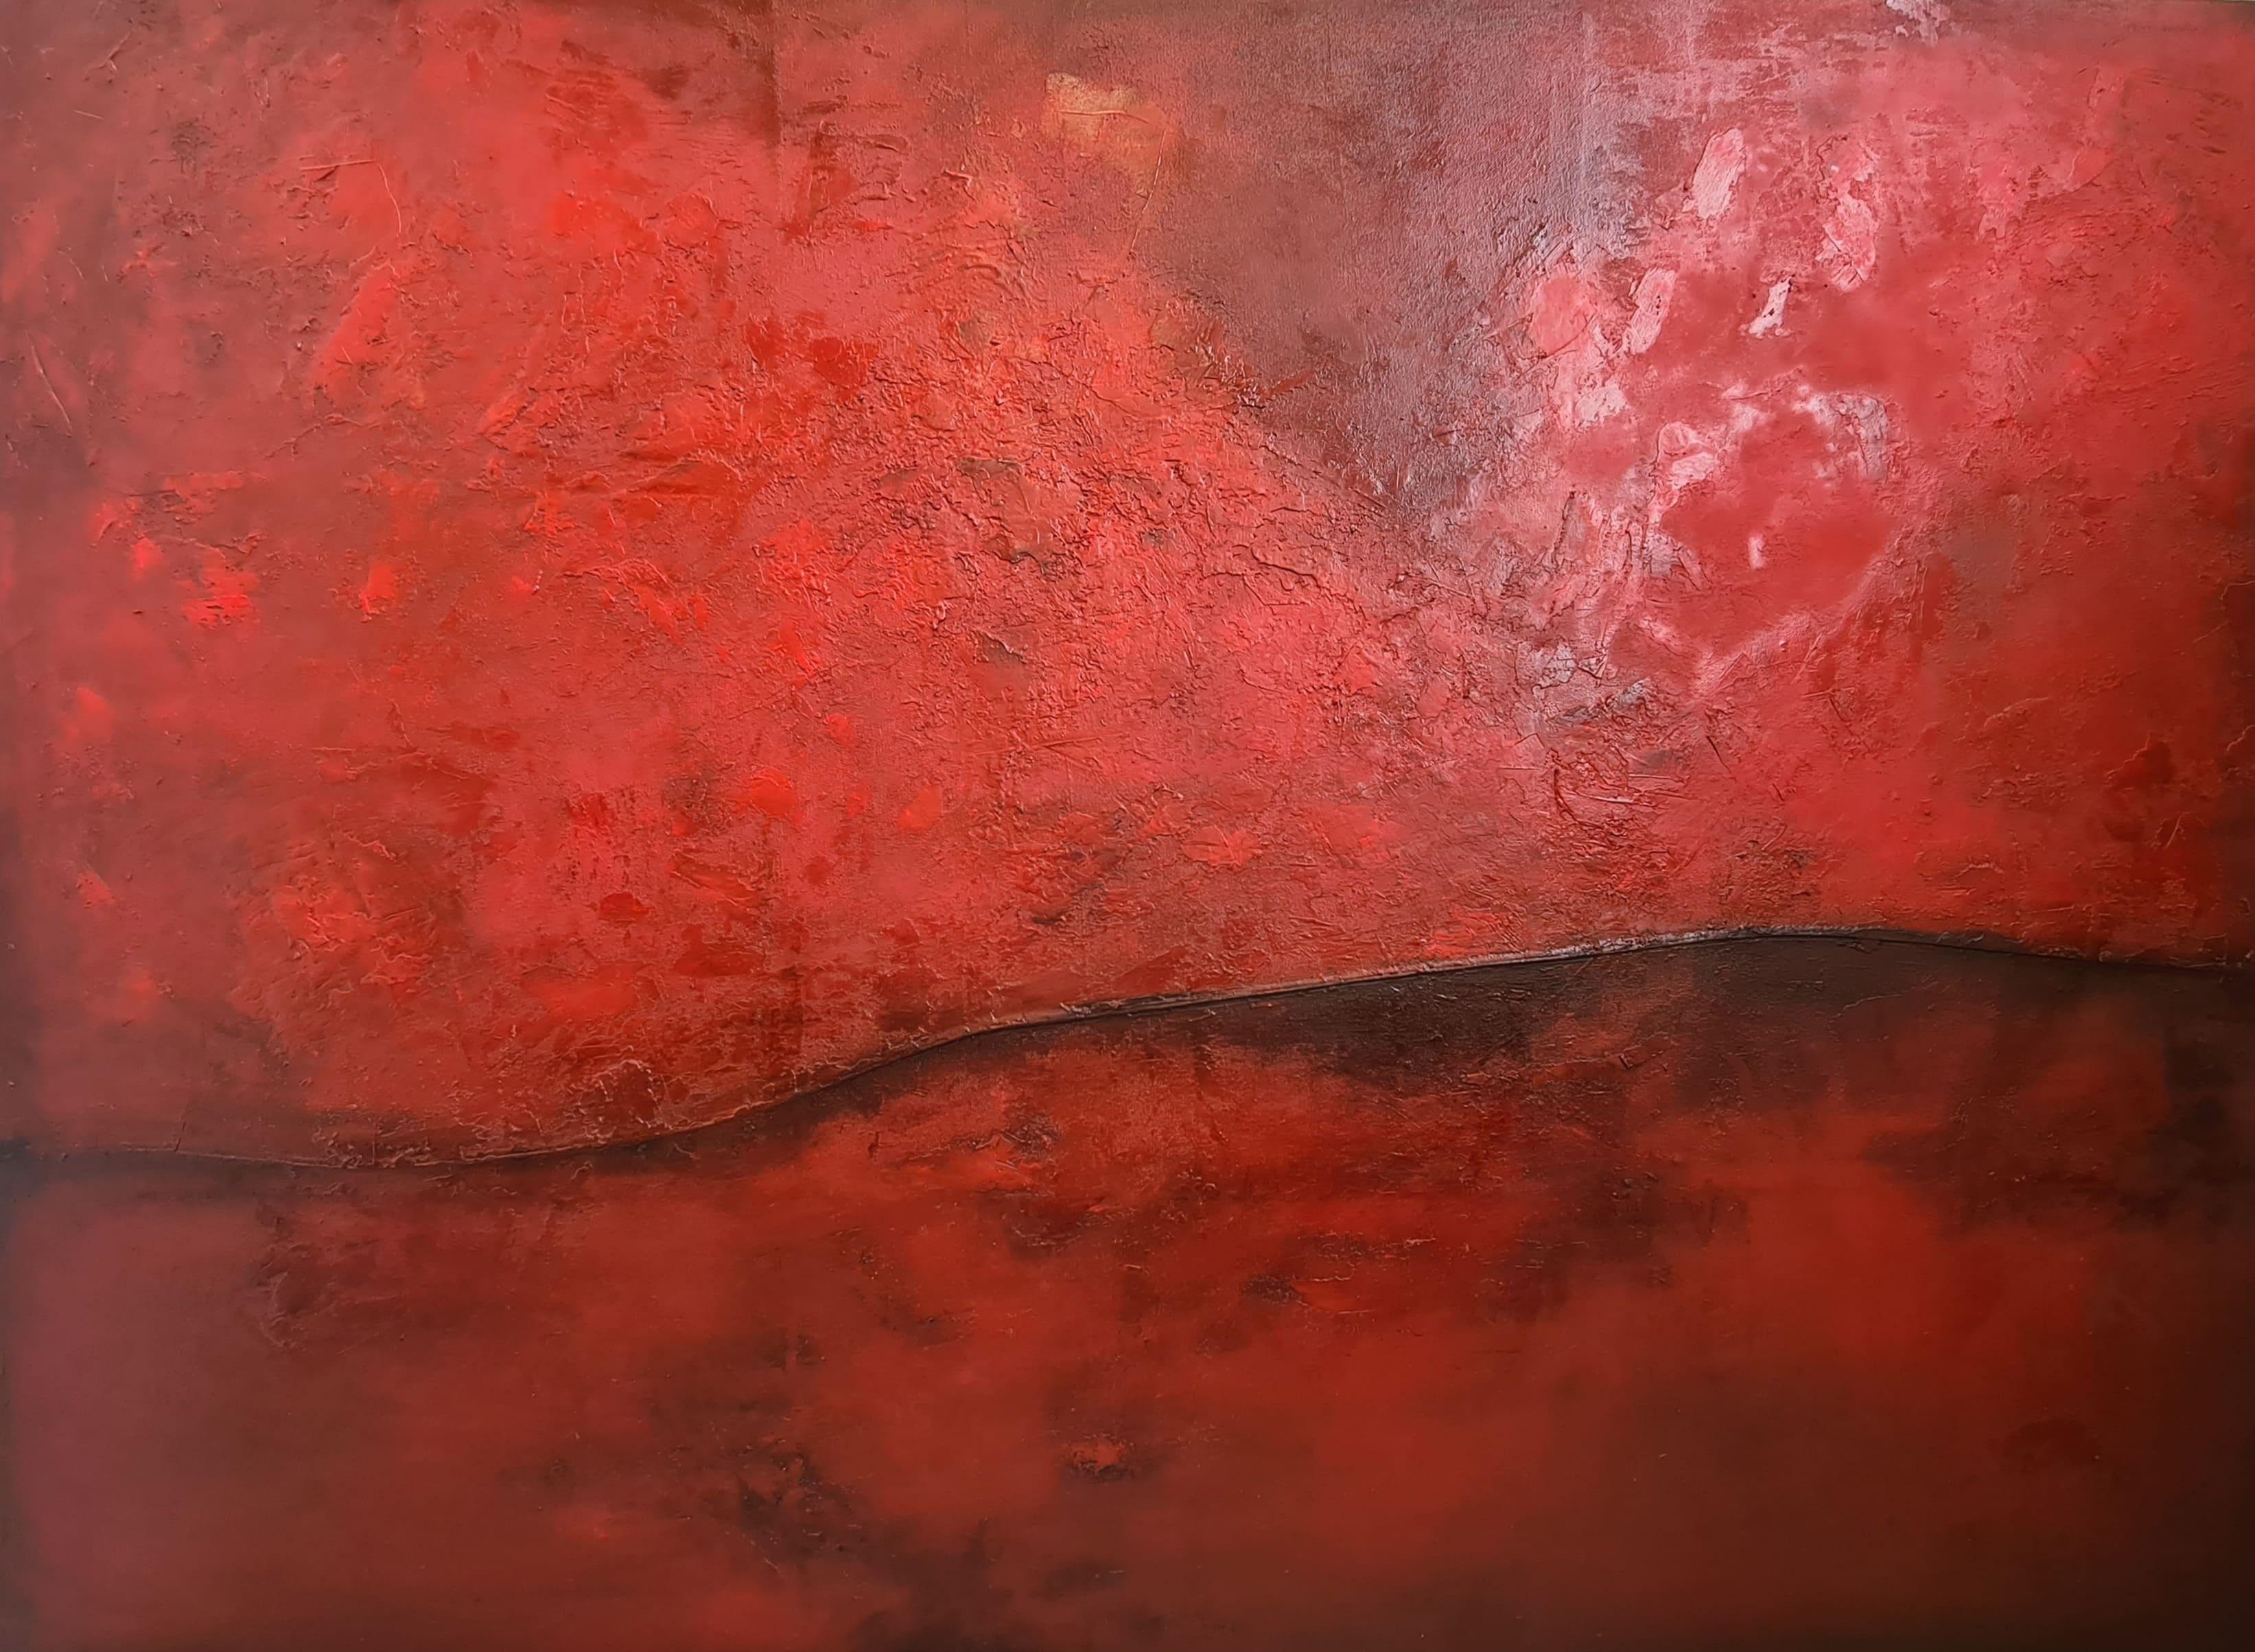 BA Fine Art work by Kamila Jakubiak. Image showing a red large scale canvas with high texture.